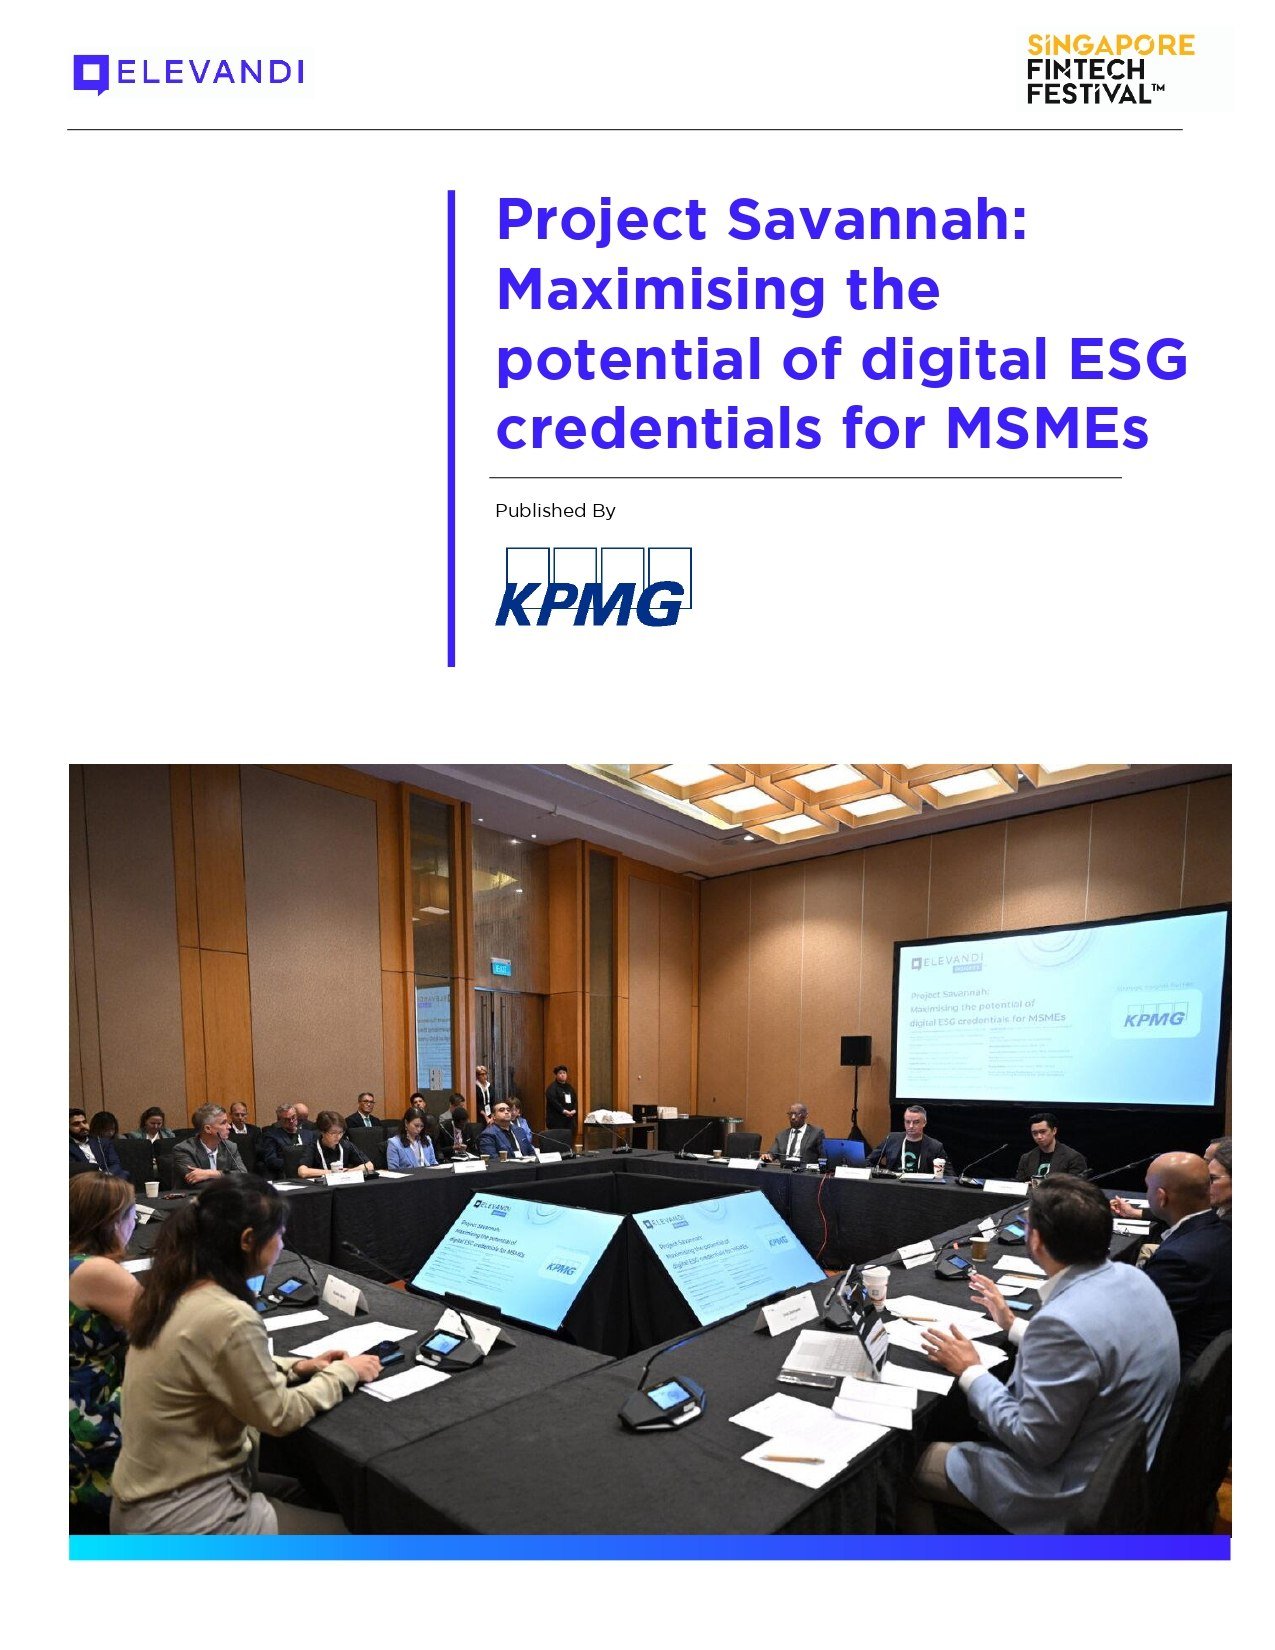 Project-savannah-maximising-the-potential-of-digital-esg-credentials-for-msmes-KPMGxElevandi-1